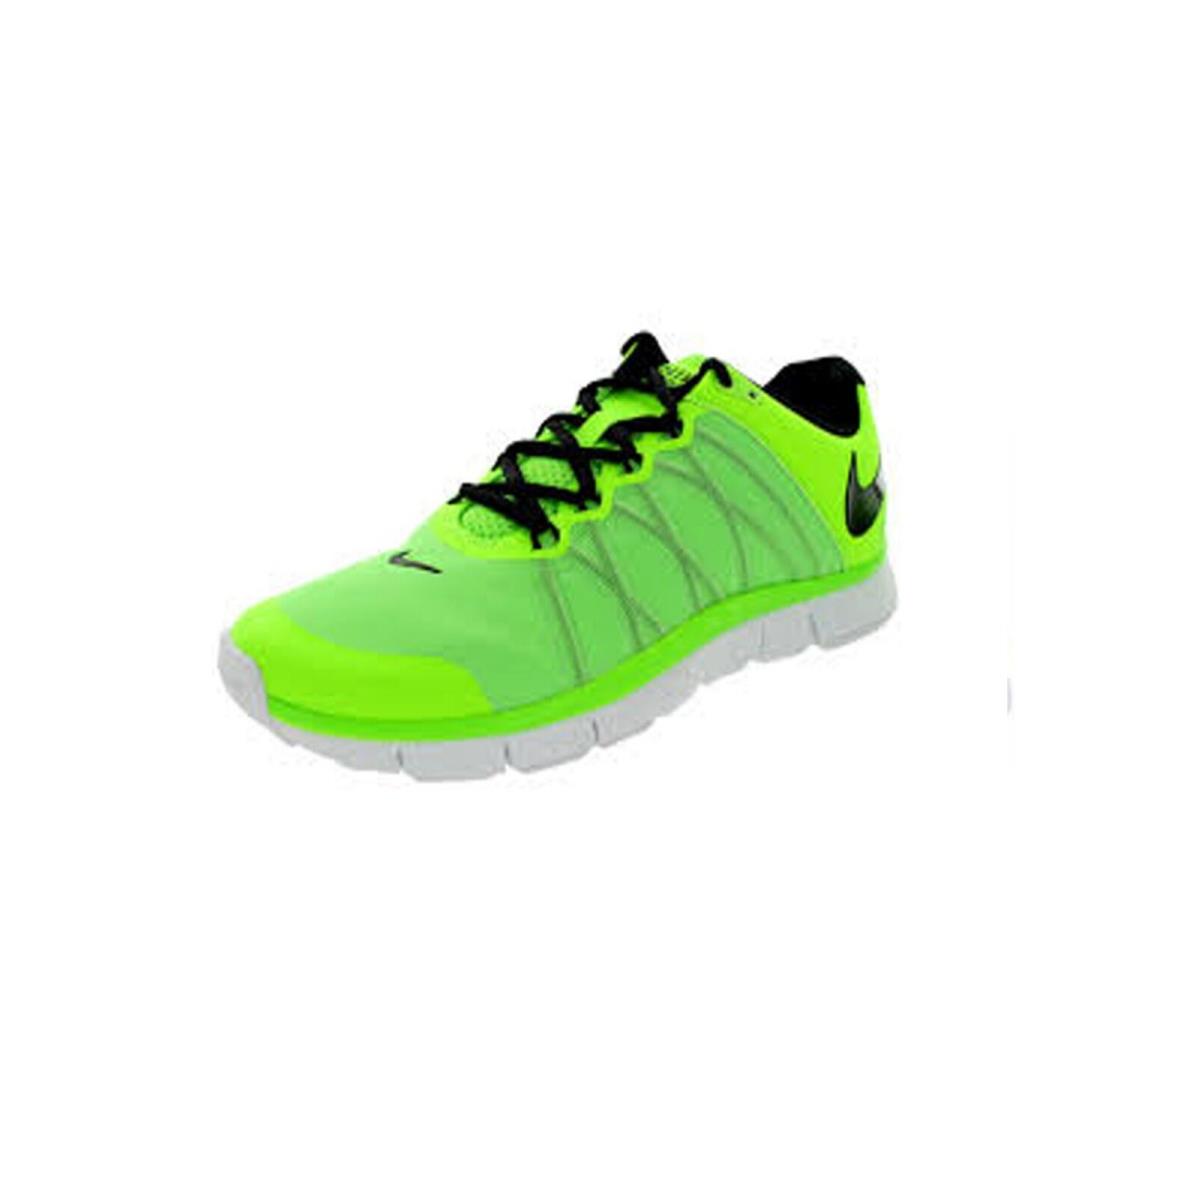 Nike Men`s Free Trainer 3.0 Shoes Electric Green 630856-301 - Green , Electric Green Manufacturer